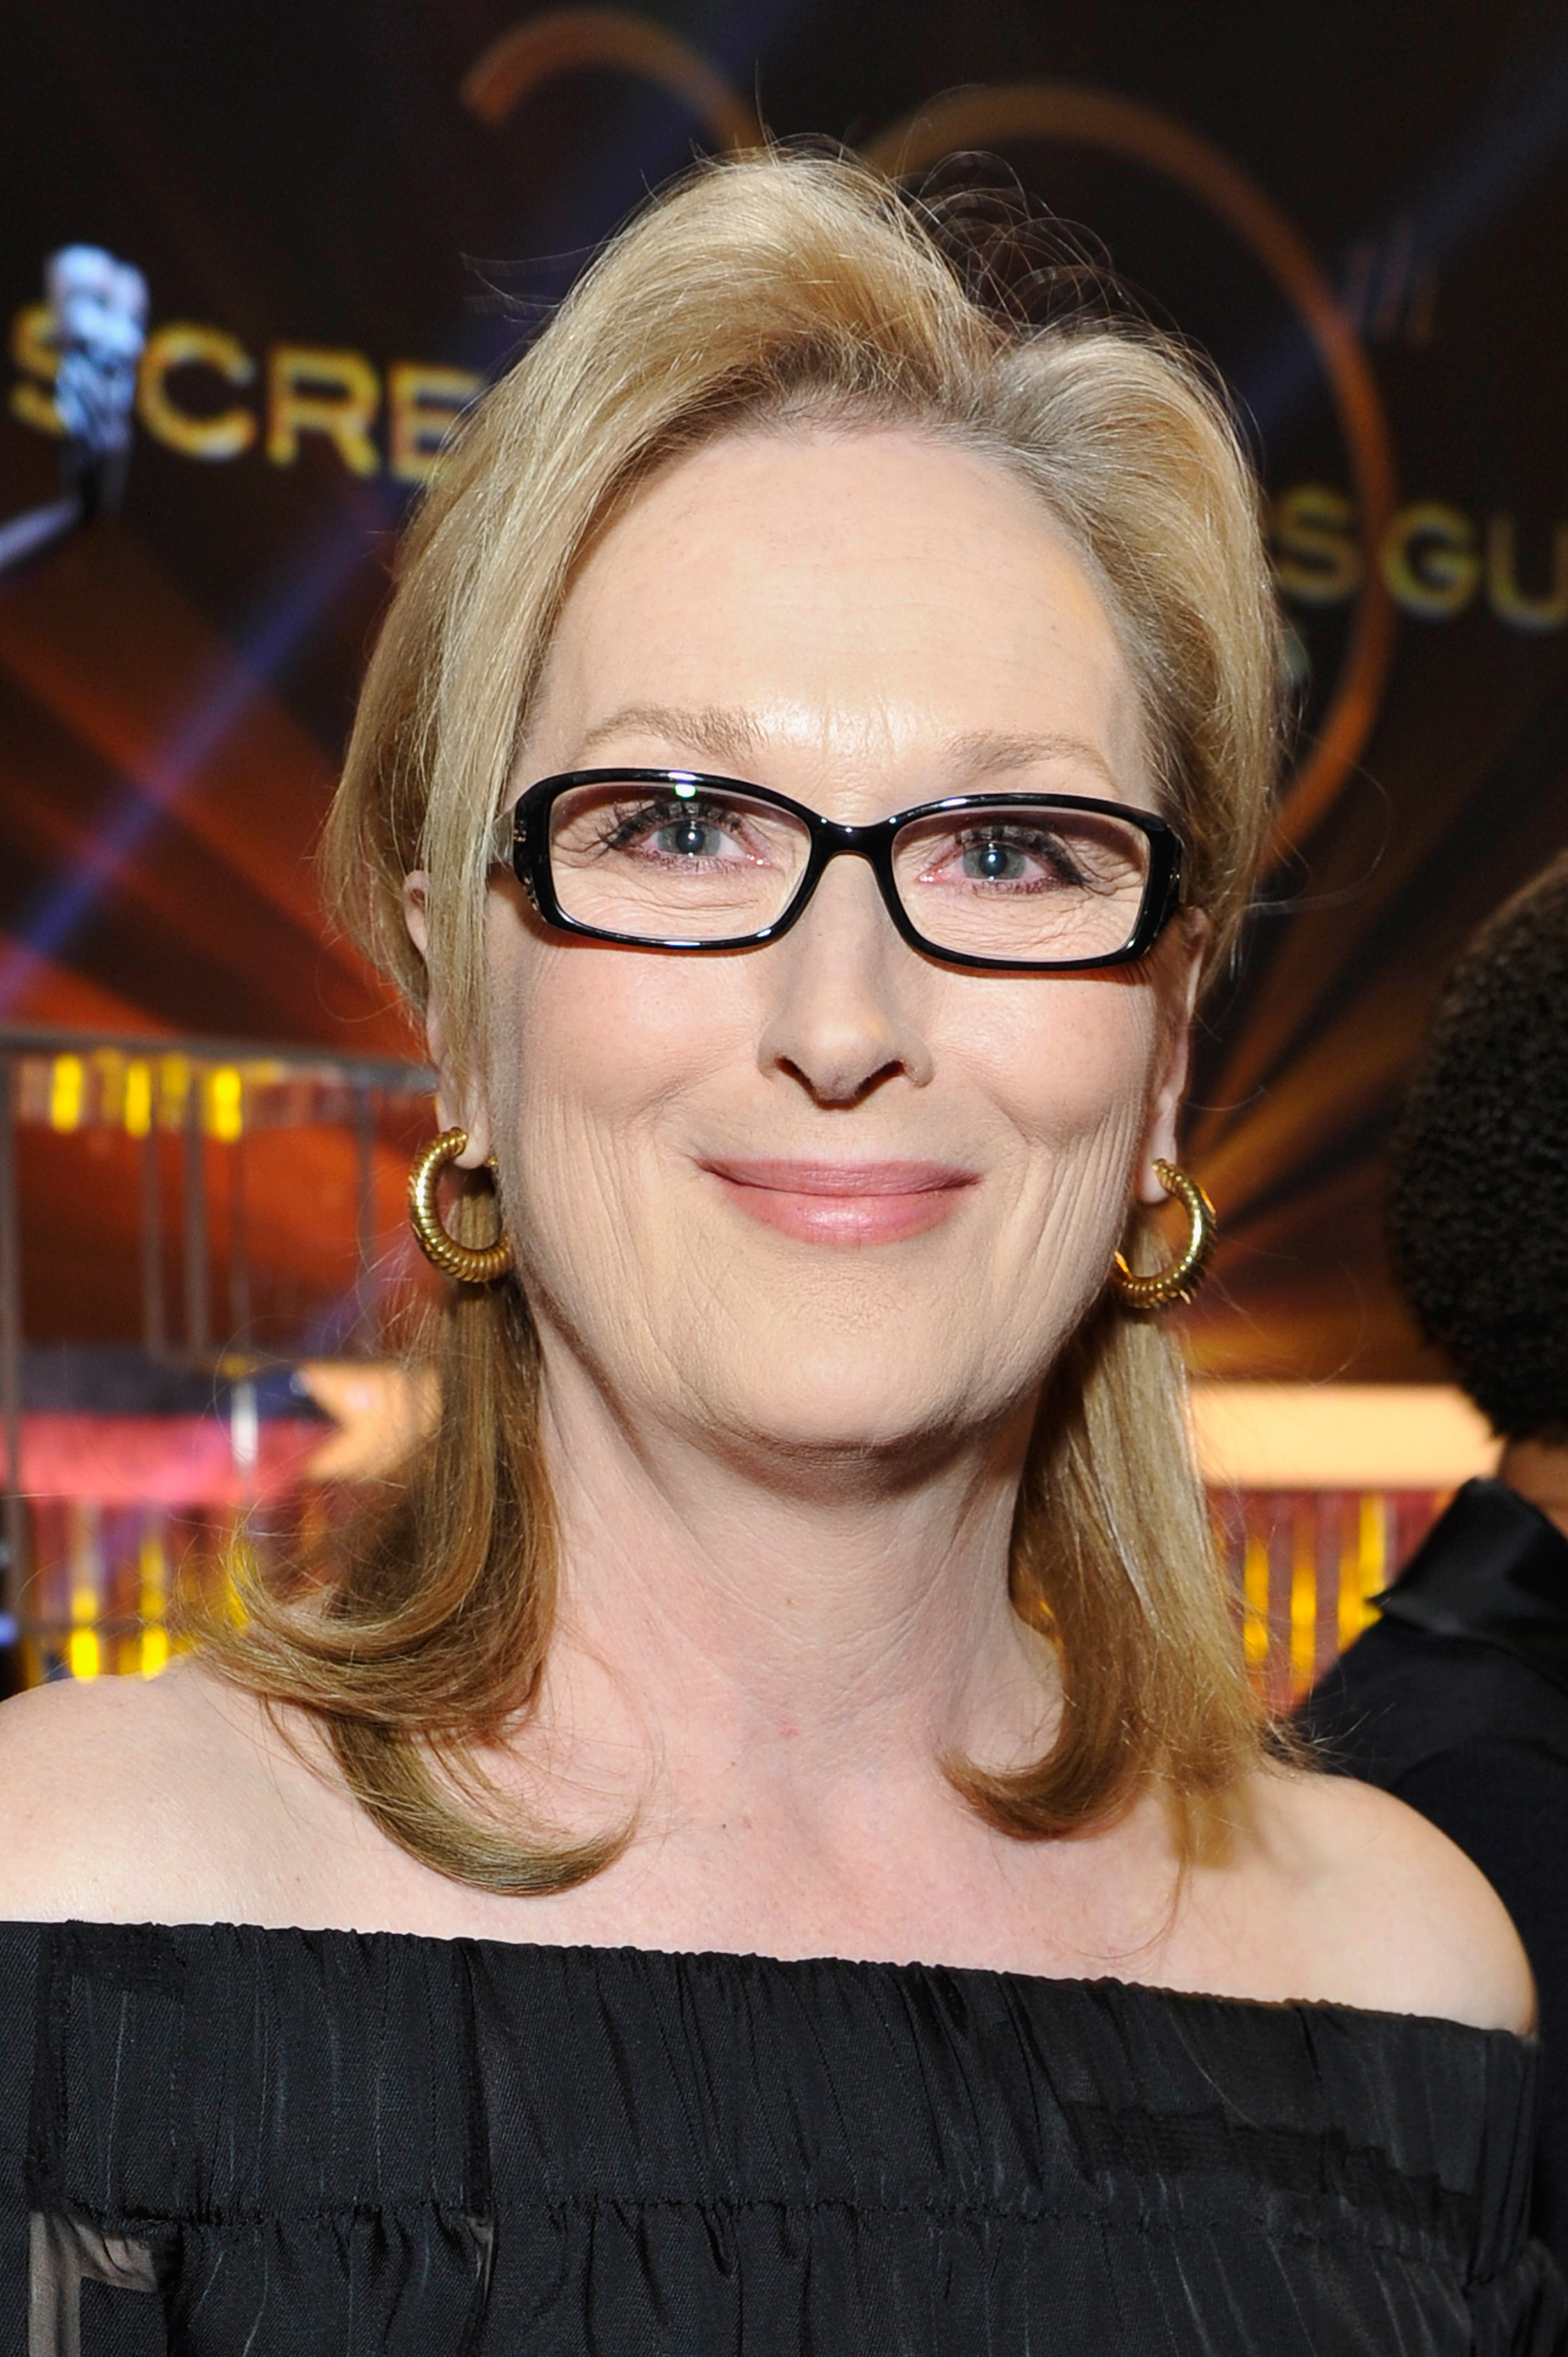 Actress Meryl Streep attends the 20th Annual Screen Actors Guild Awards at The Shrine Auditorium on January 18, 2014 in Los Angeles, California | Source: Getty Images